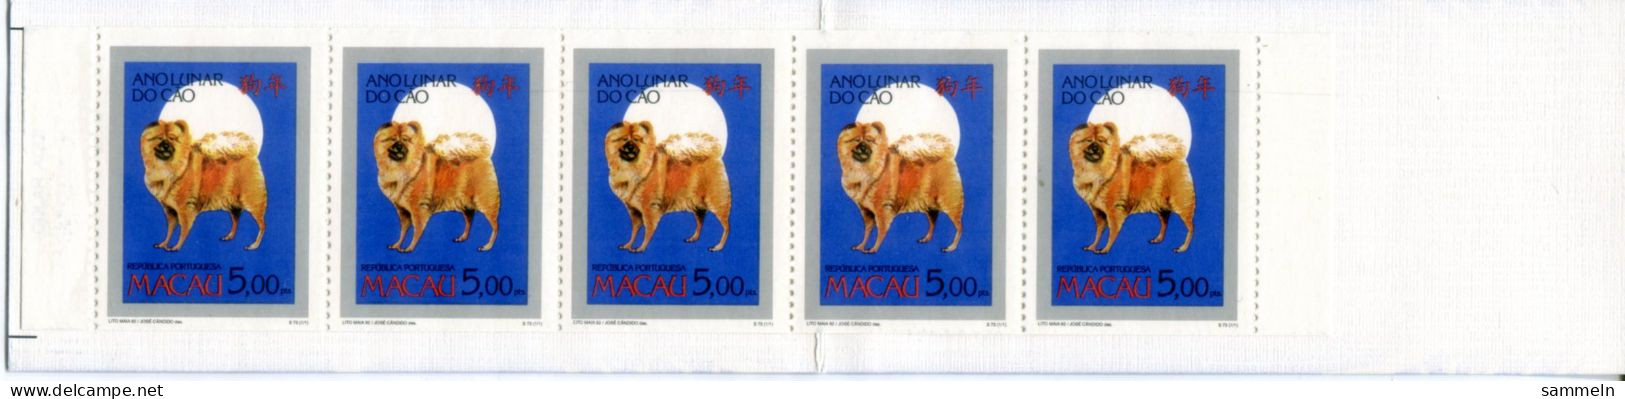 MACAO 746 C MH Mnh - Chinesisches Jahr Des Hundes, Chinese Year Of The Dog, Année Chinoise Du Chien - MACAU - Libretti